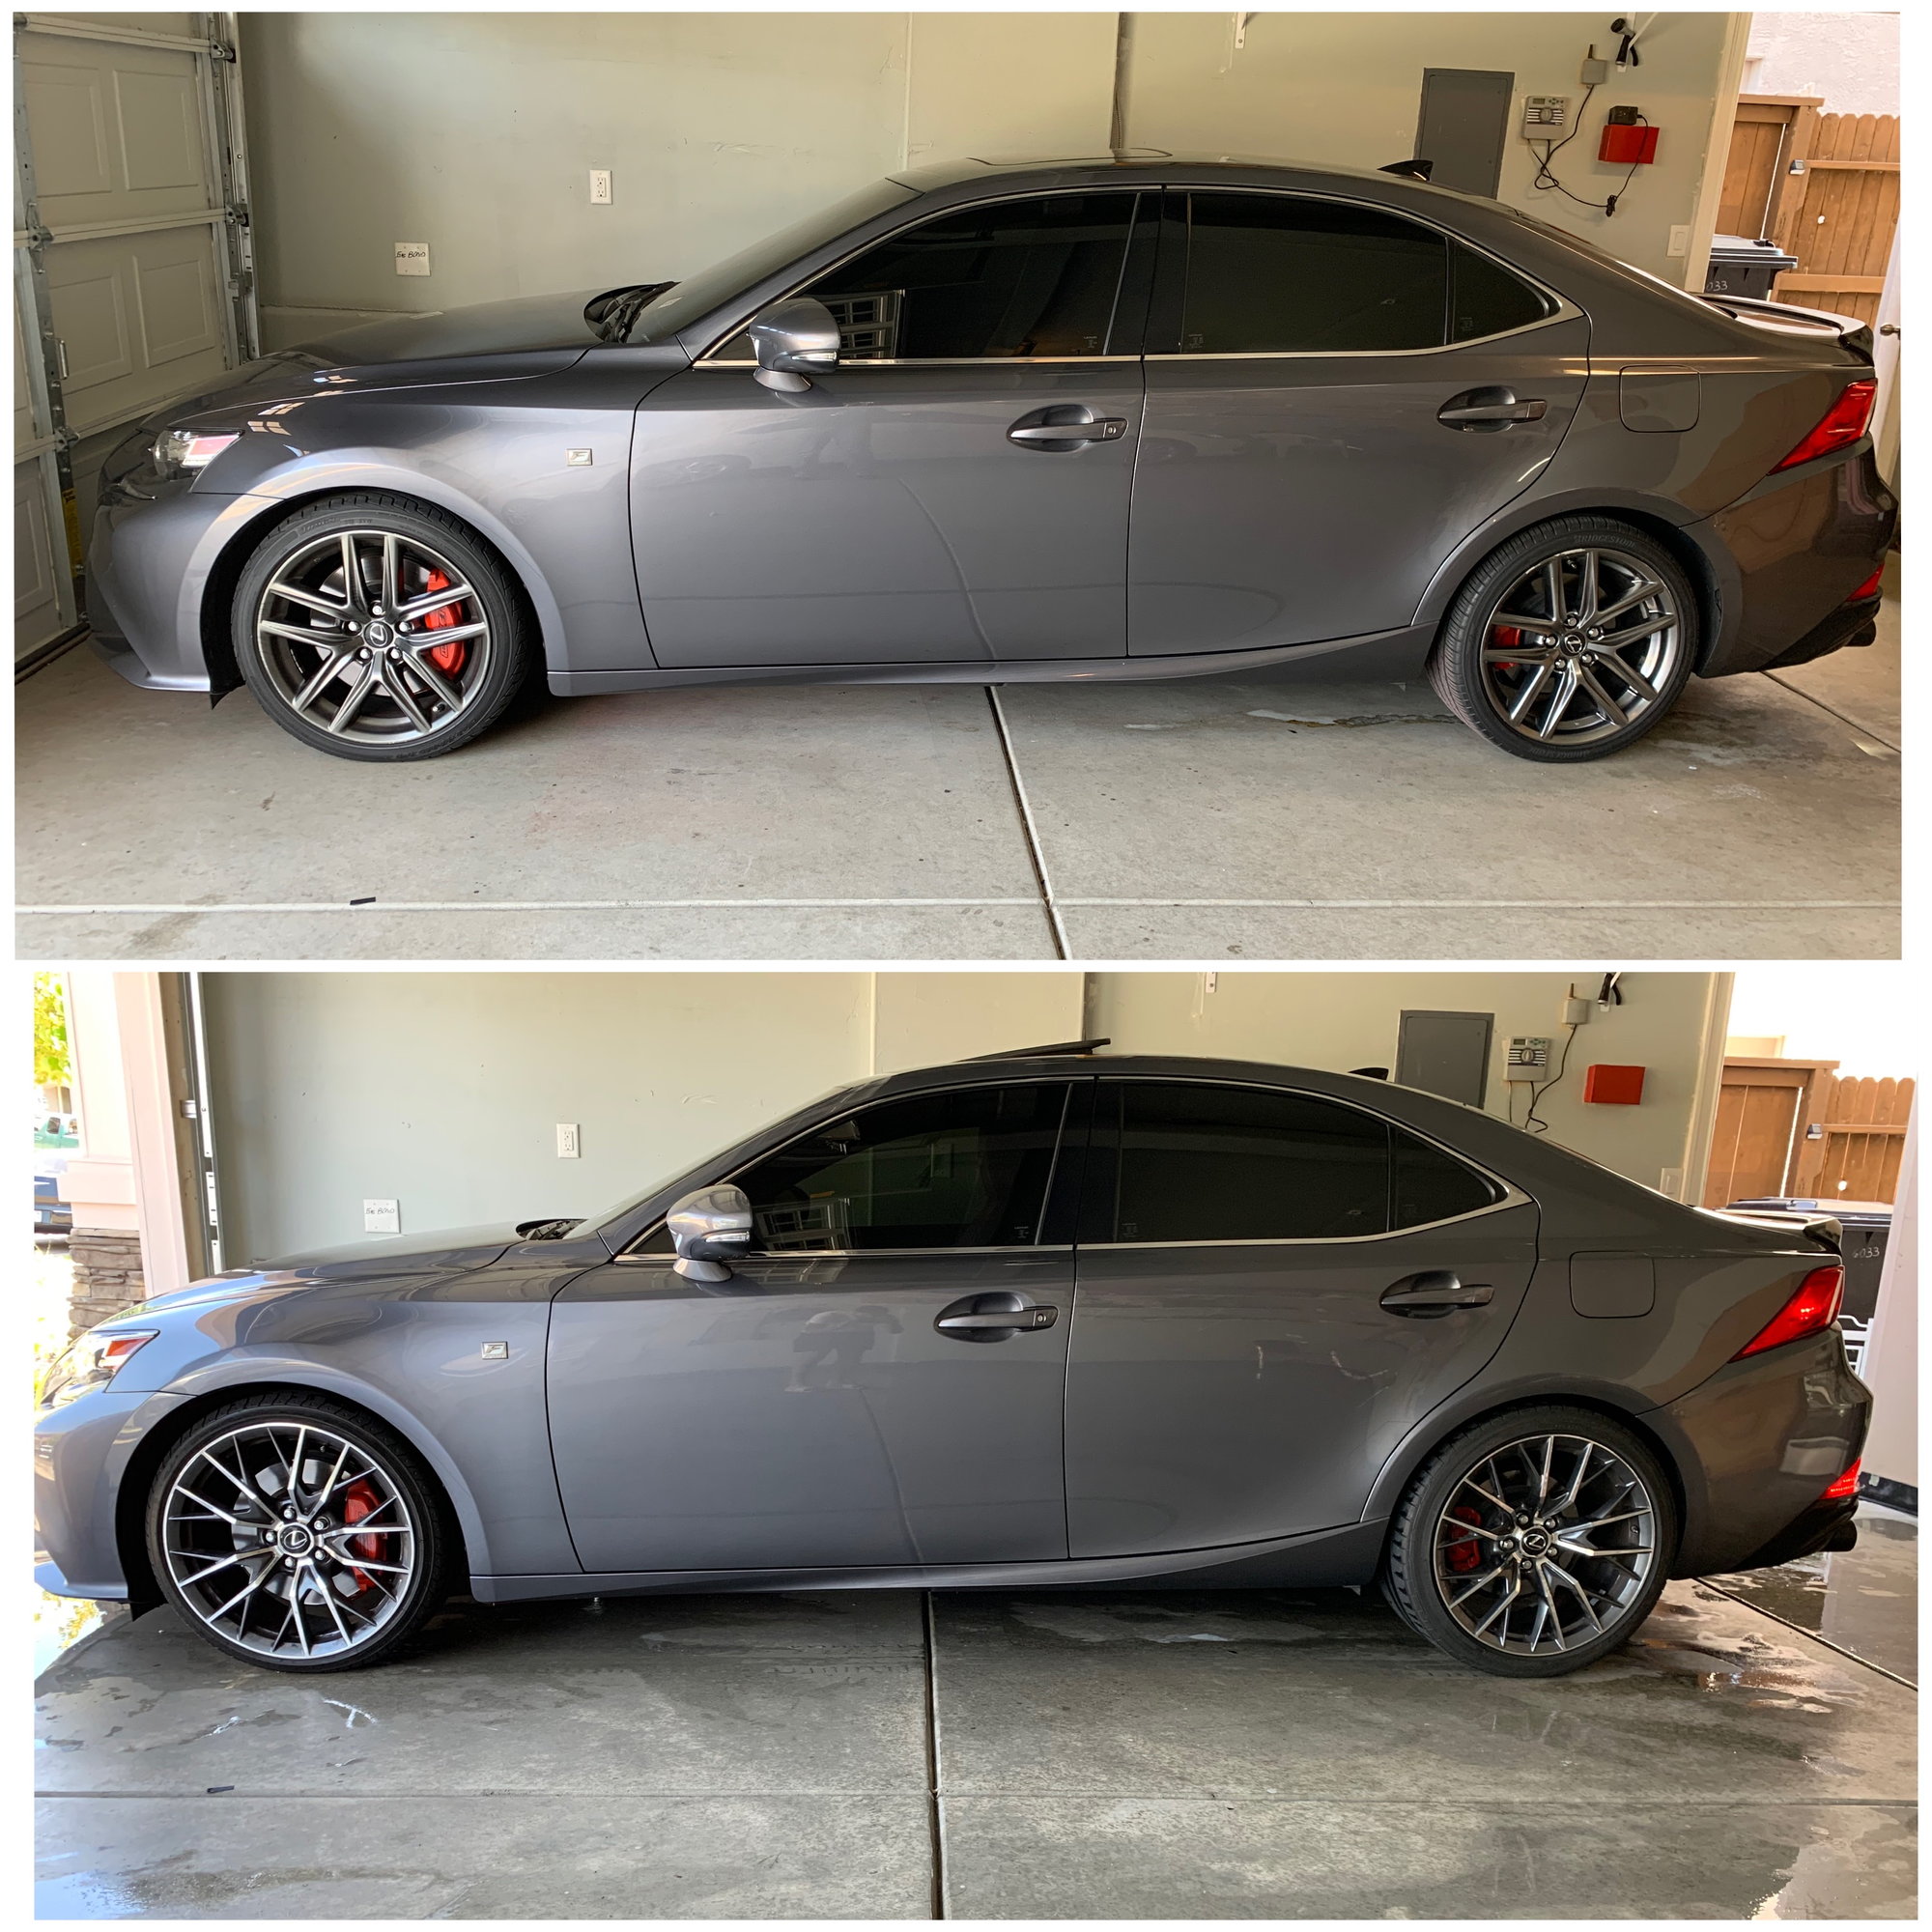 Where does everyone buy their oem parts? Is parts.com really oem? - Page 2  - ClubLexus - Lexus Forum Discussion